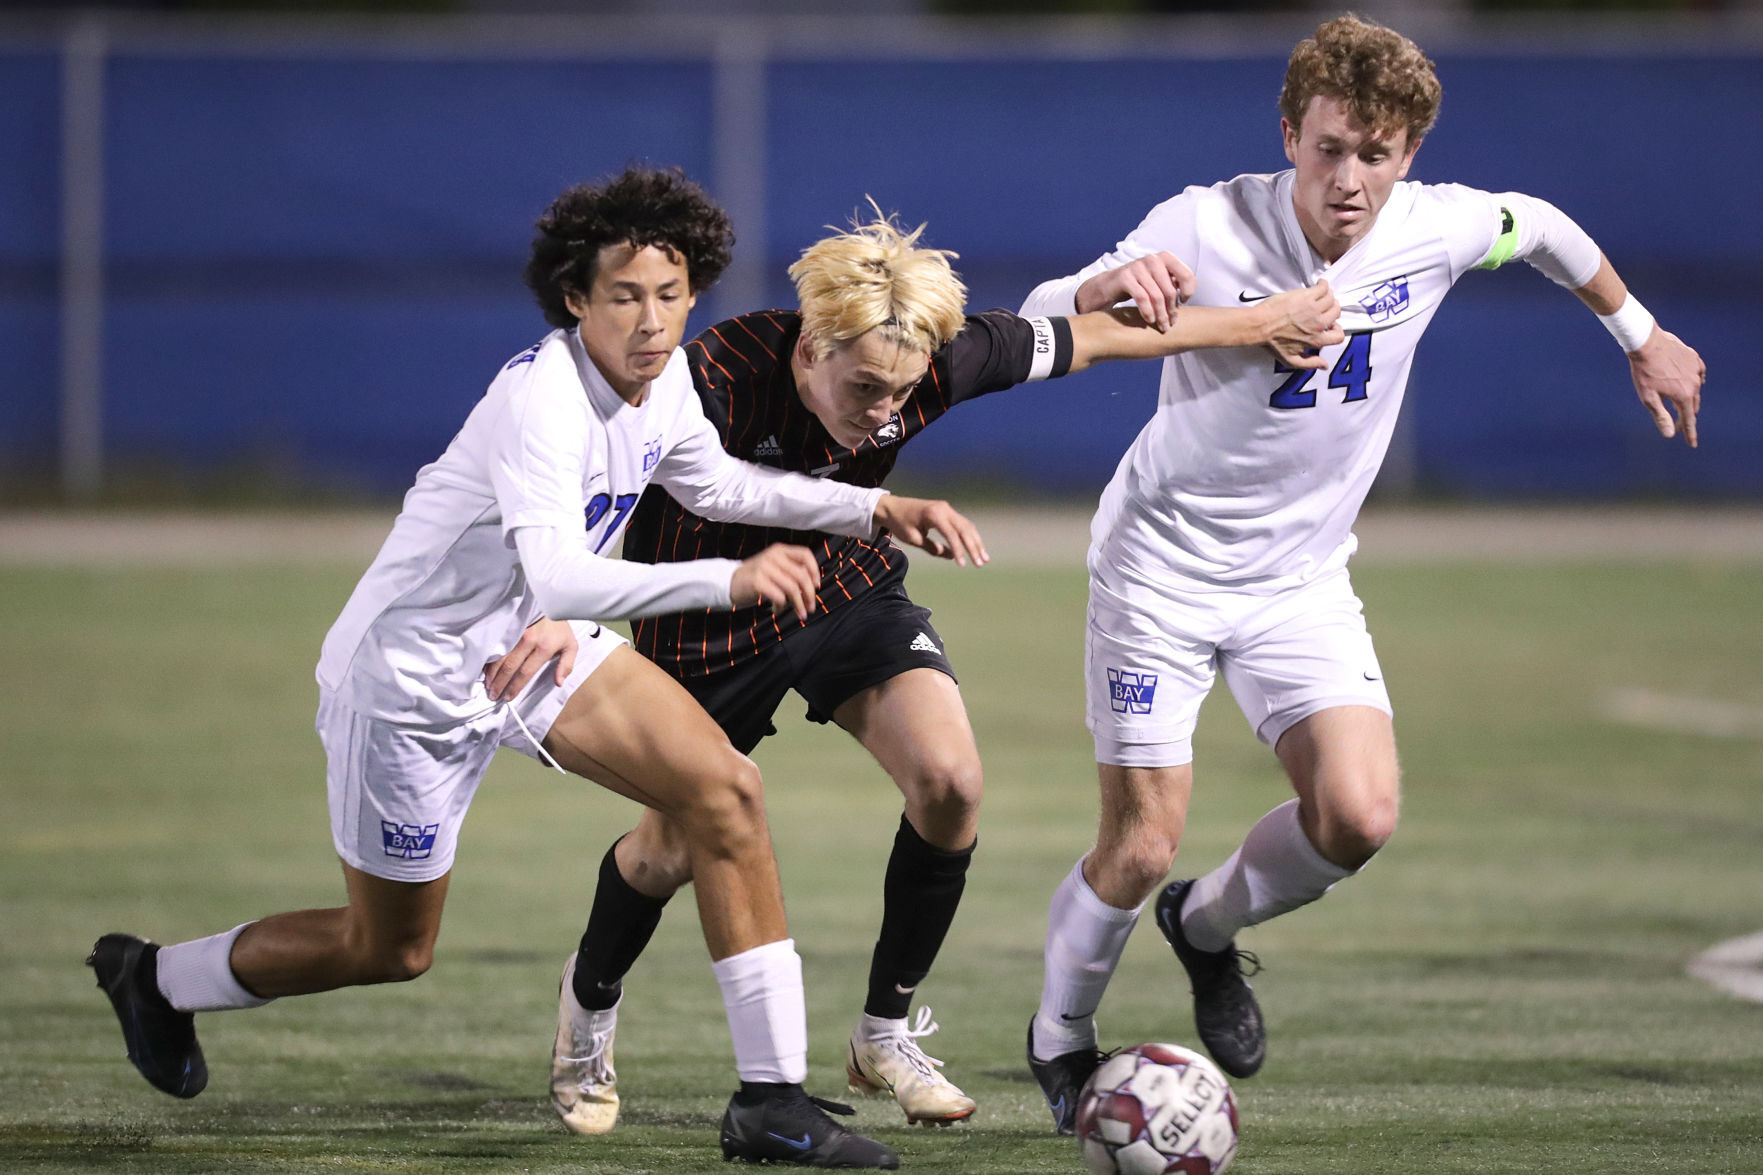 Top 5 Highly Anticipated Boys Soccer Games in the Madison Area